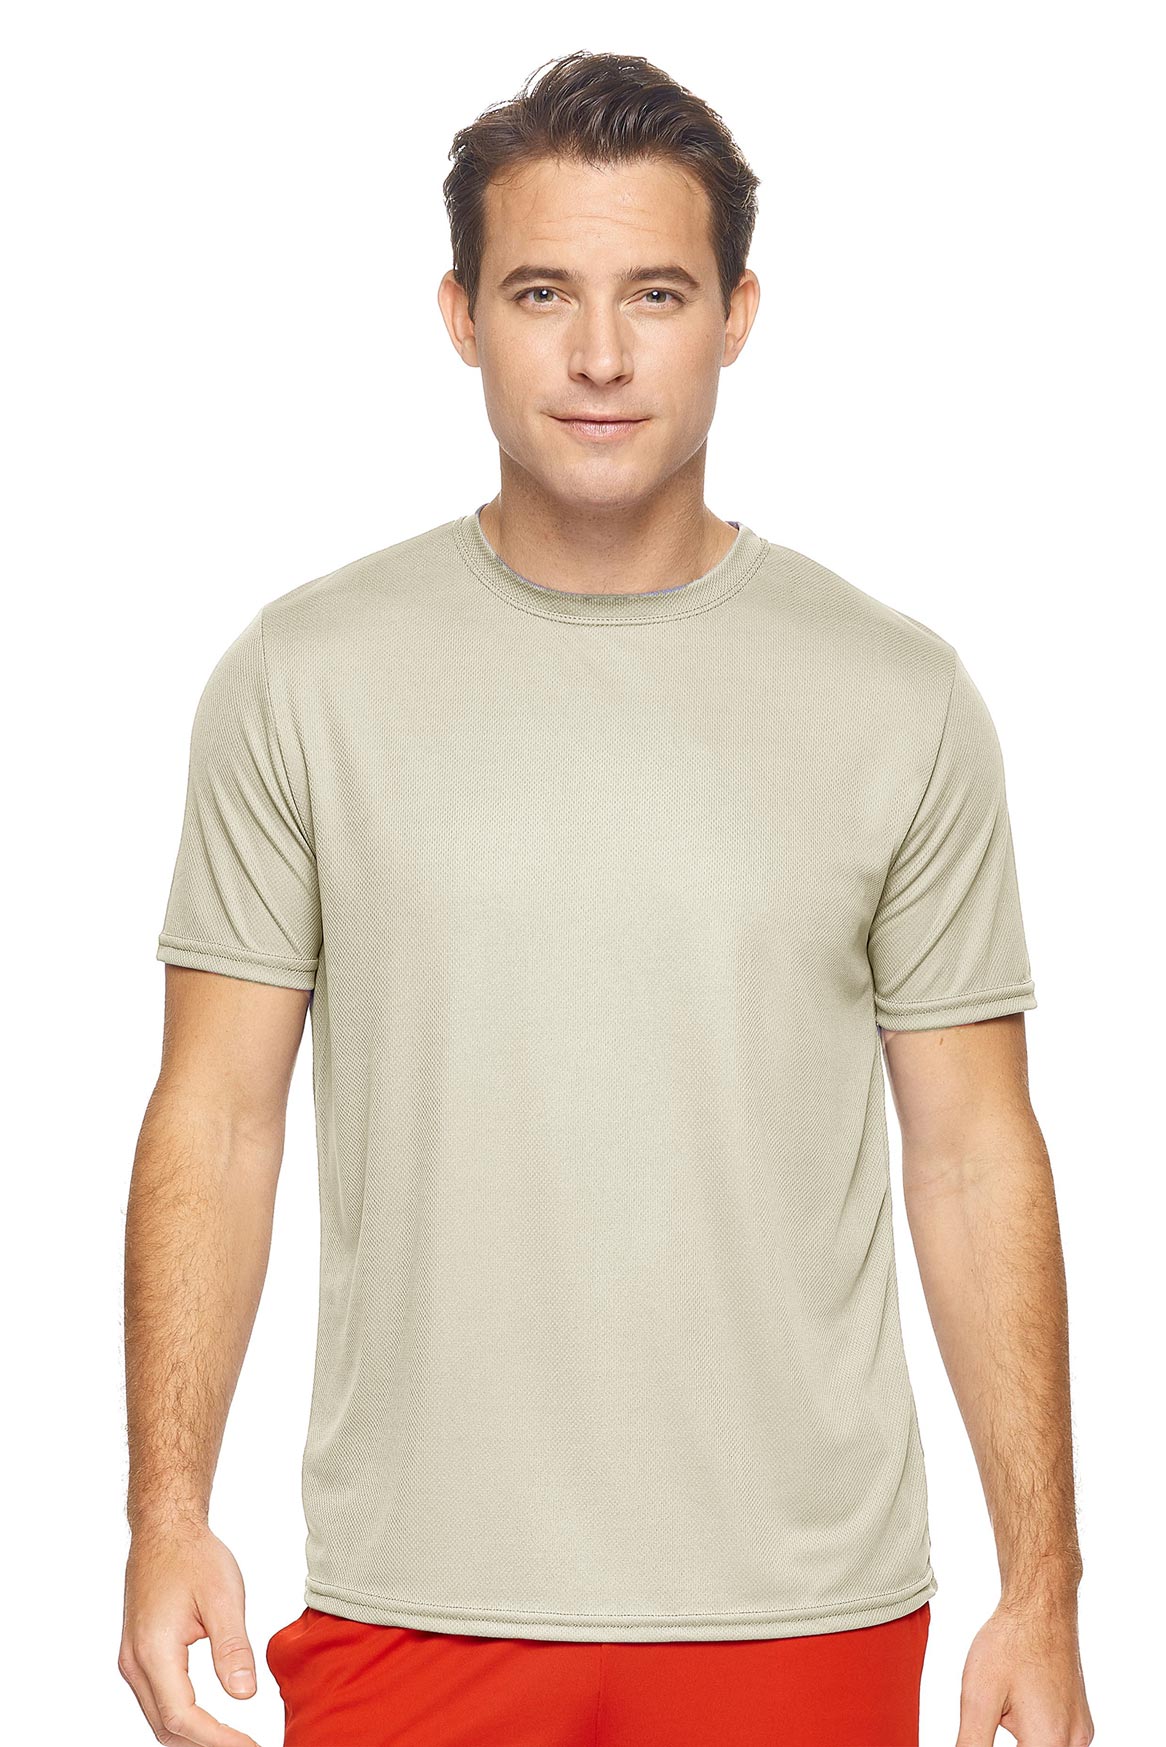 Expert Brand Retail Sportswear Men's Oxymesh Tec Tee Made in USA activewear sand#color_sand